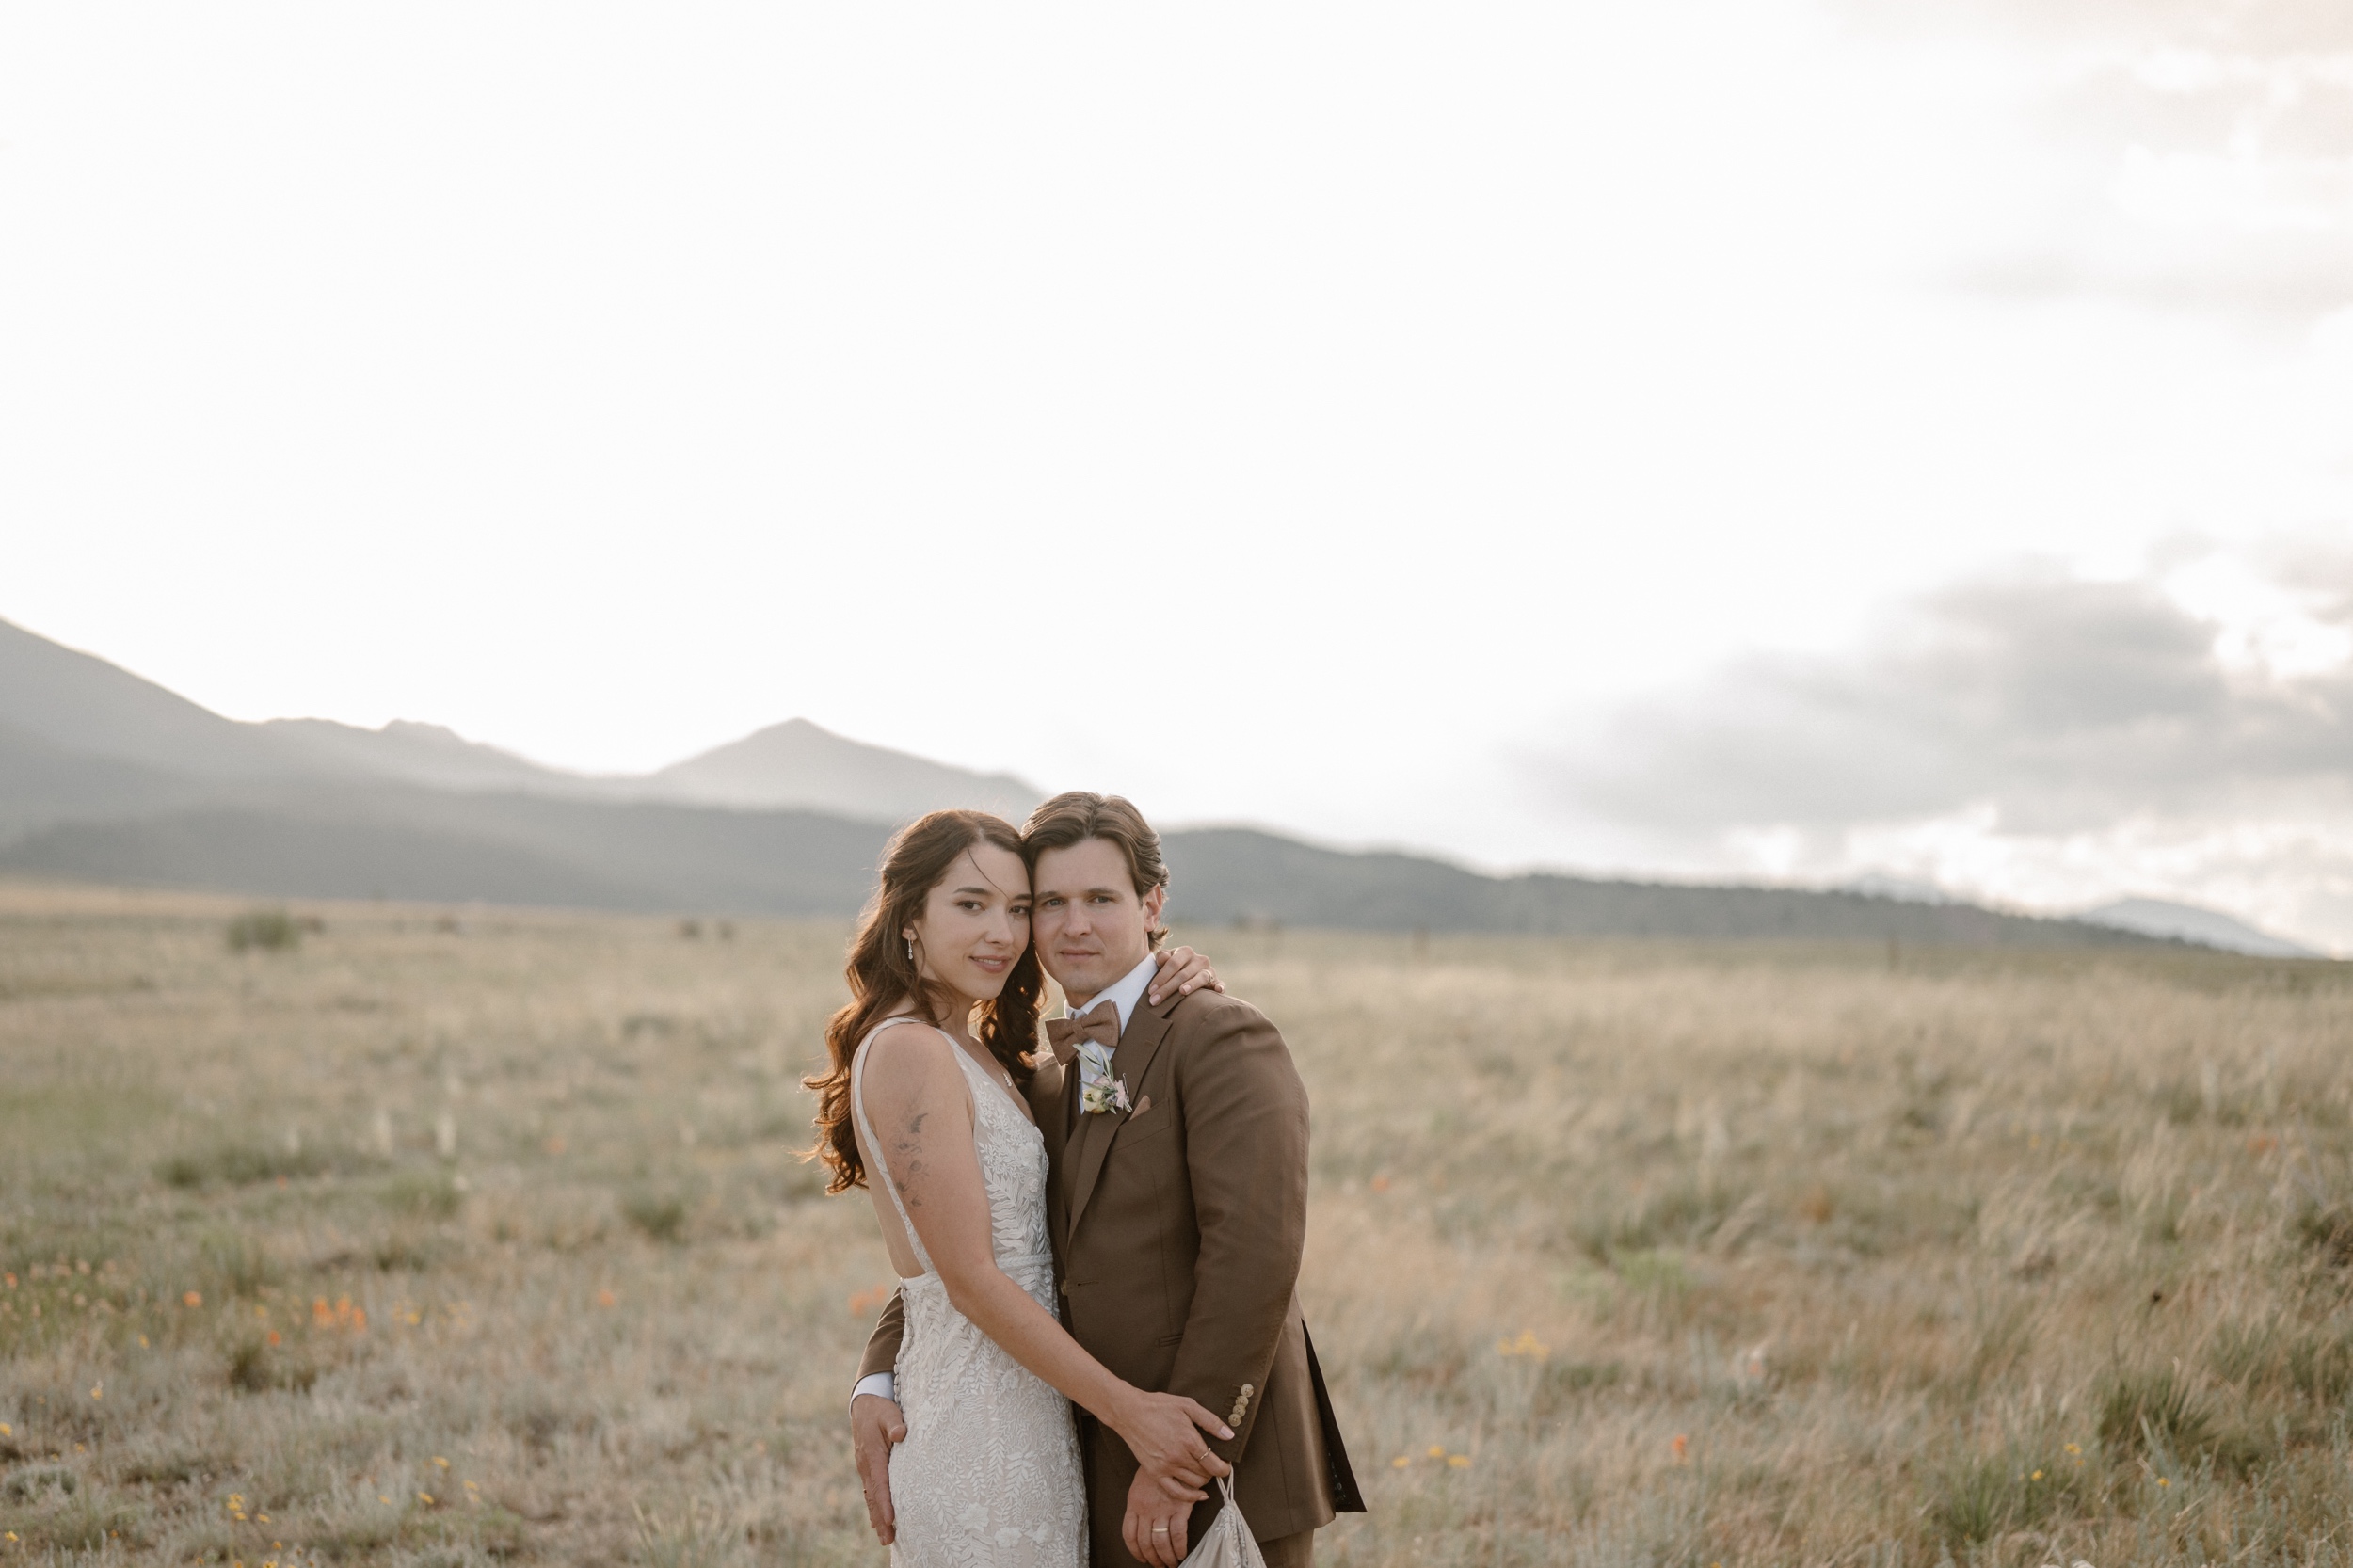 A bride and groom pose for their wedding portraits at their Three Peaks ranch wedding in a grassy field with mountains in the background. Photo by Colorado wedding photographer Ashley Joyce.